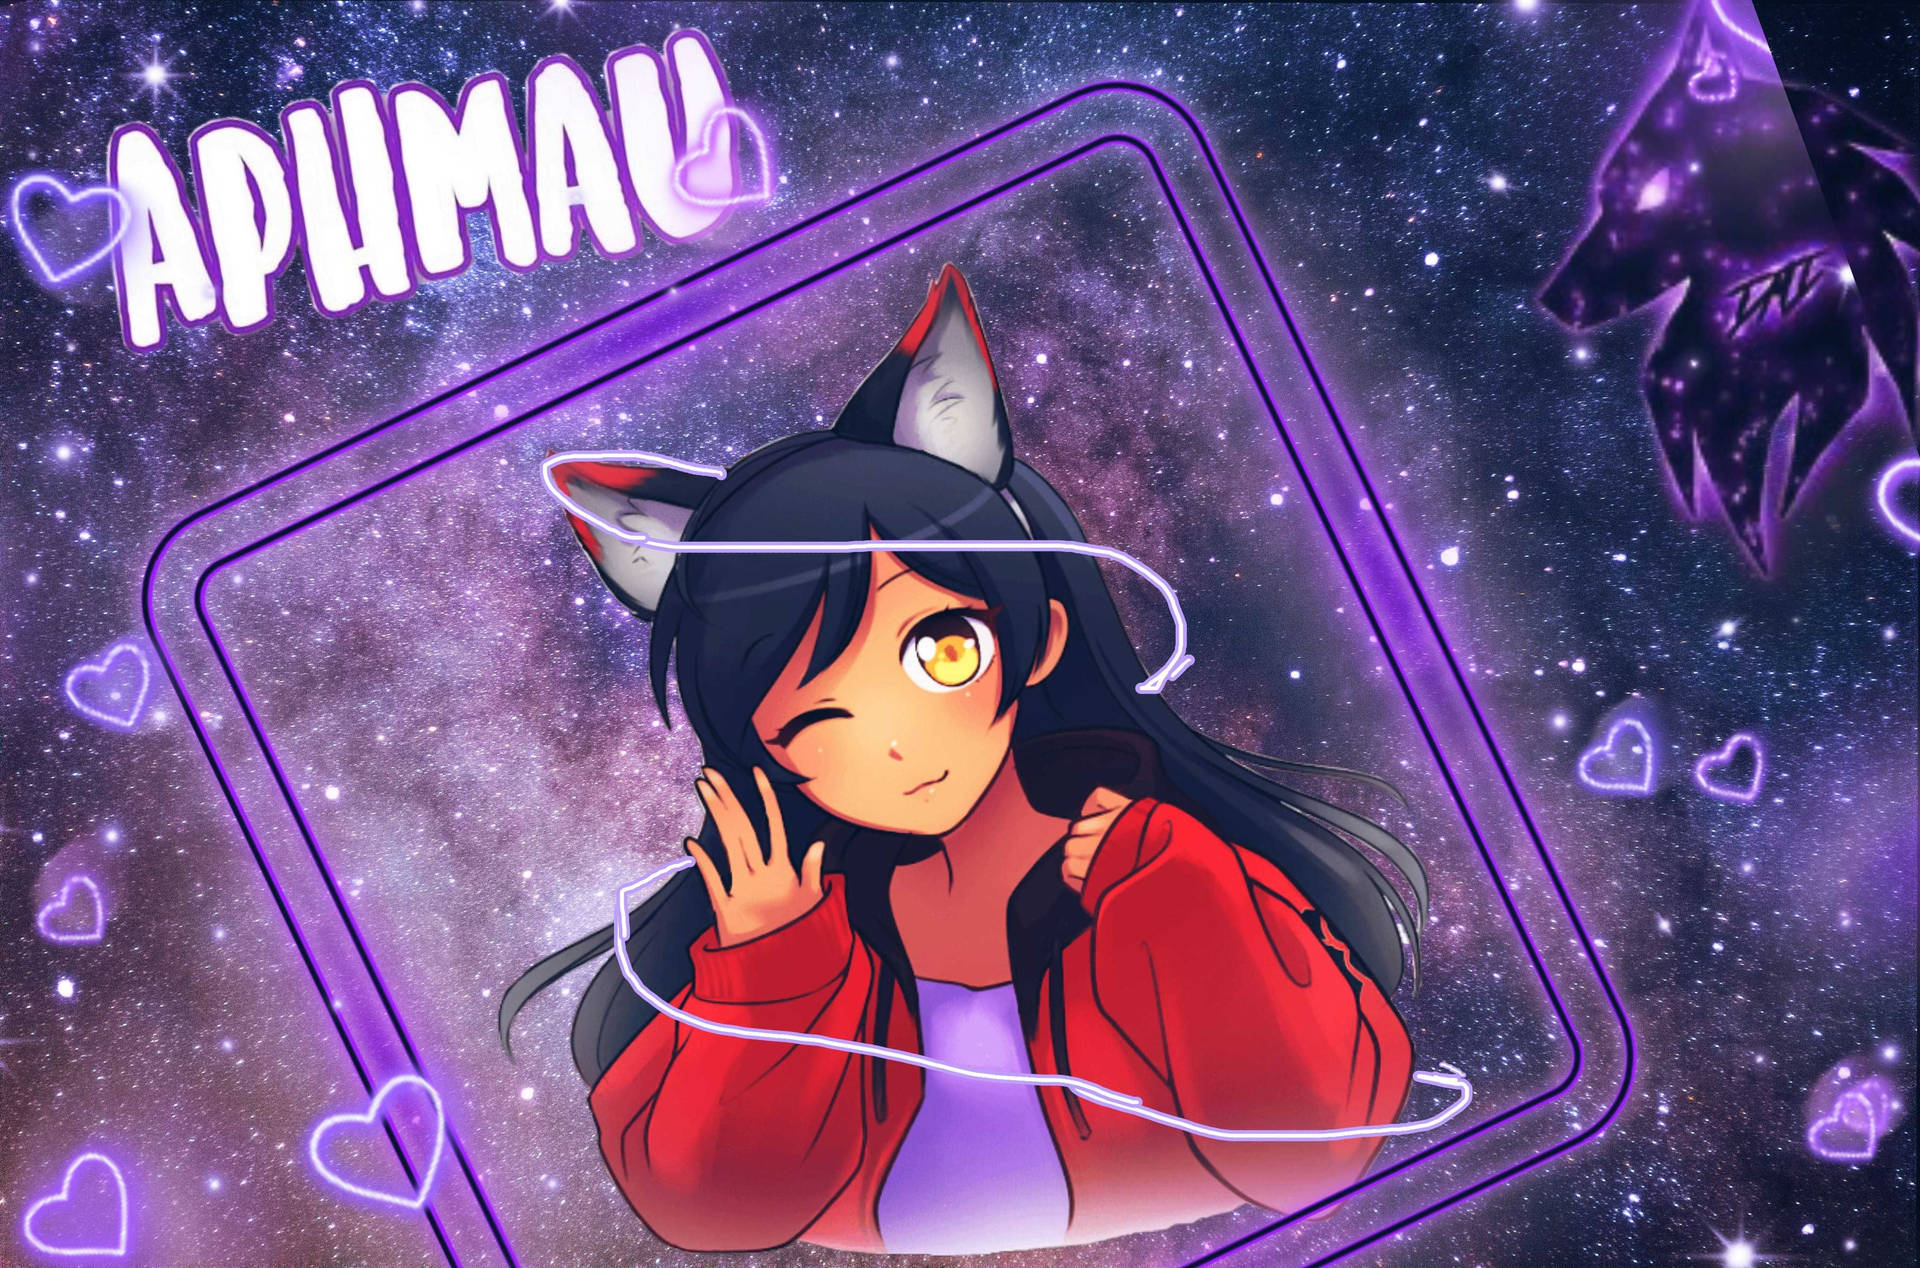 Background Aphmau Wallpaper Discover more Anime, Aphmau, Character, Fanart,  minecraft wallpaper. https://www.enwallpaper… | Aphmau wallpaper, Aphmau  fan art, Aphmau